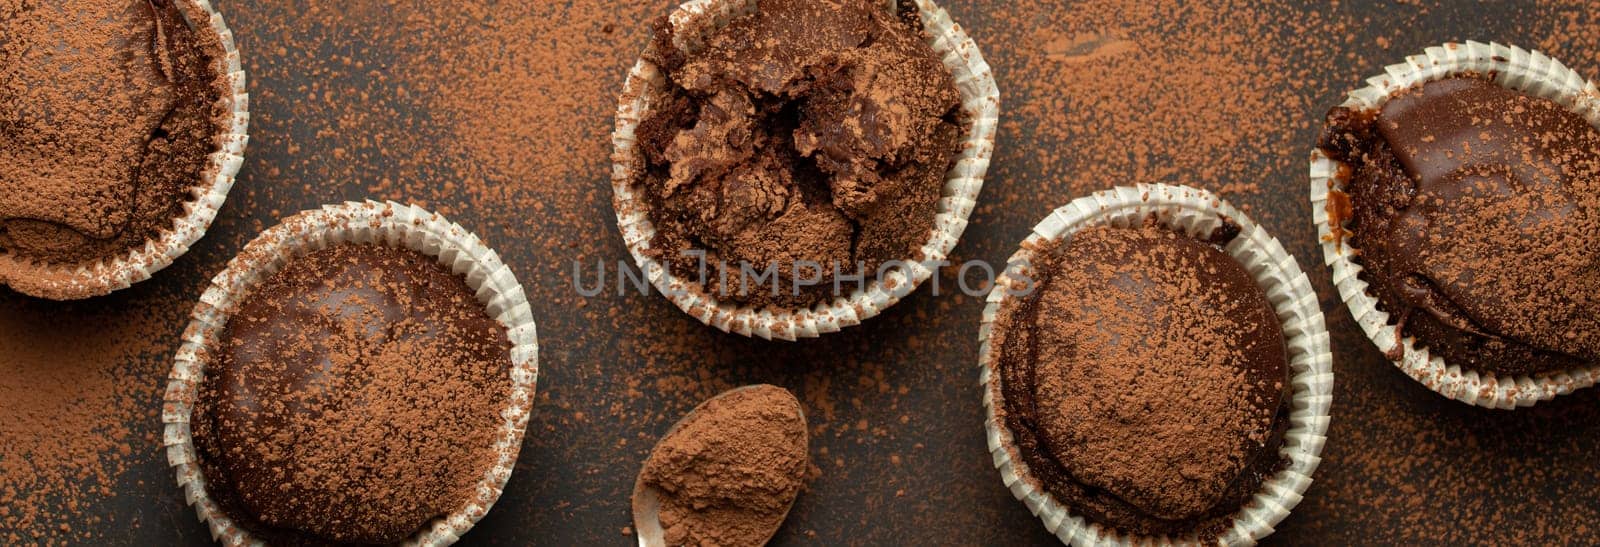 Chocolate browny muffins and cocoa in teaspoon top view on brown rustic stone background, sweet homemade dark chocolate cupcakes by its_al_dente